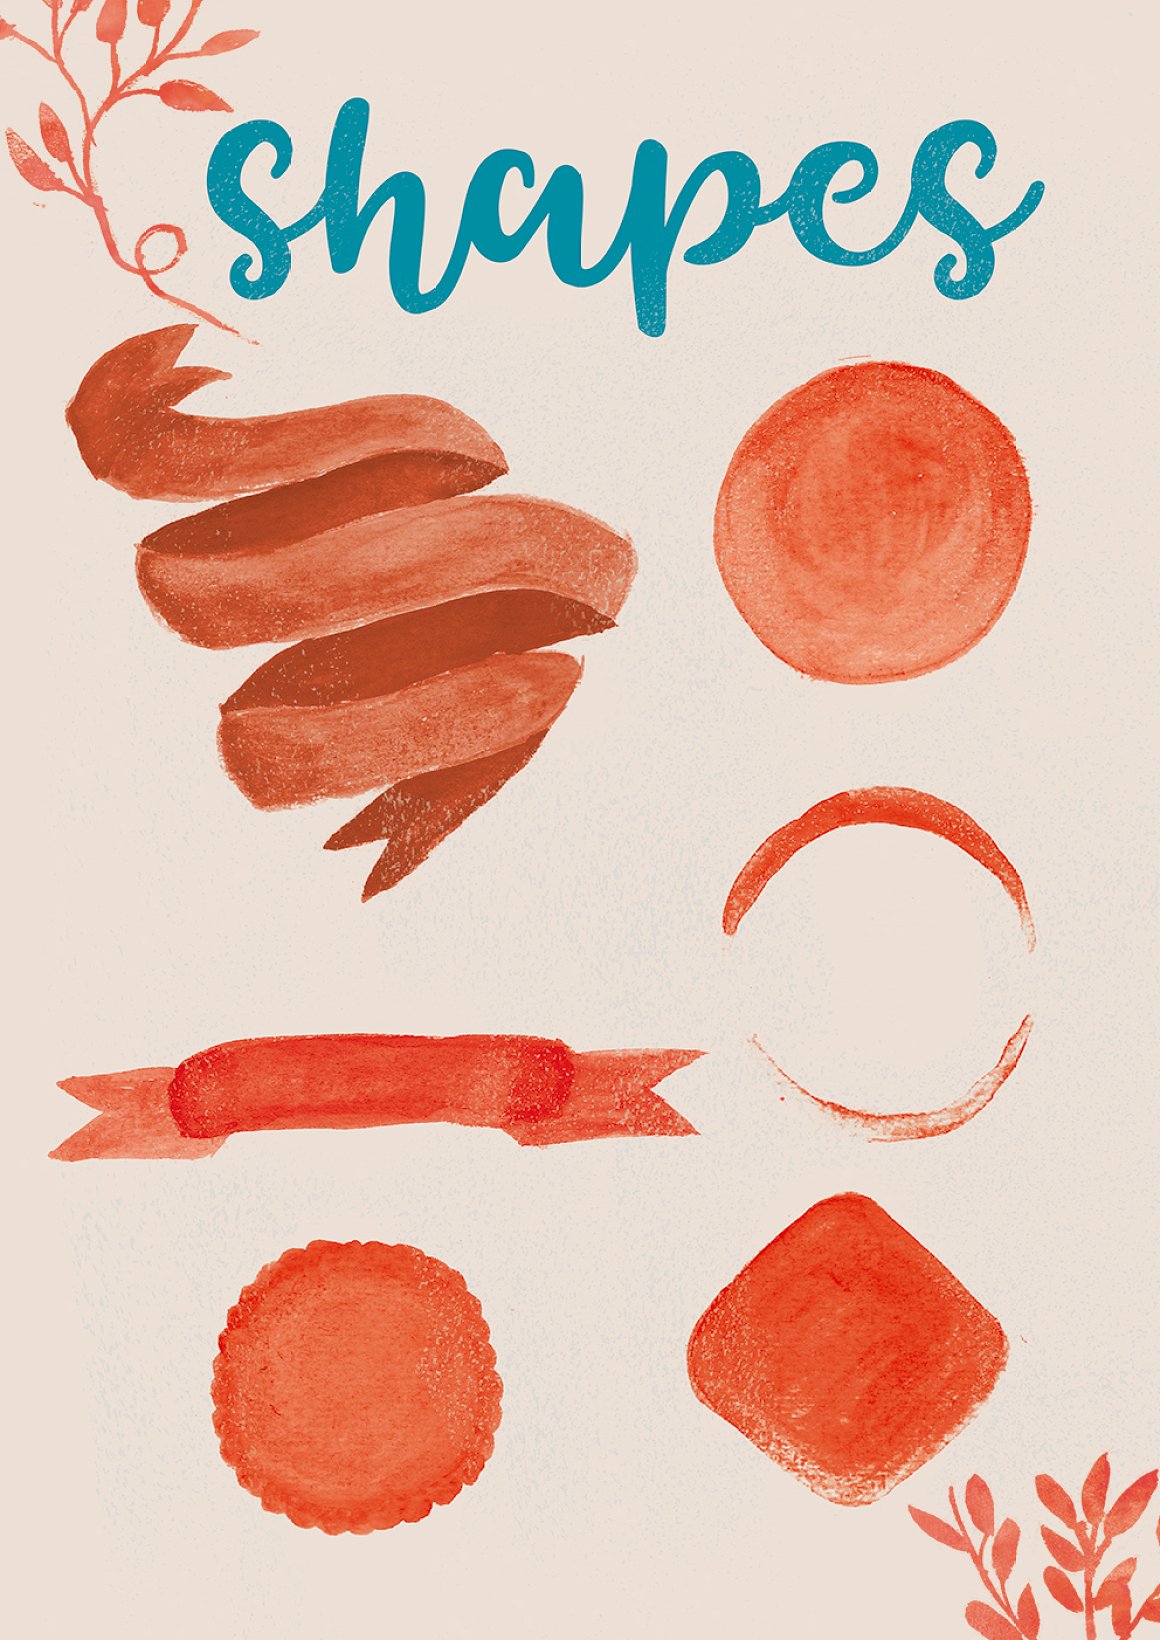 Extra watercolor shapes in a warm autumn color.